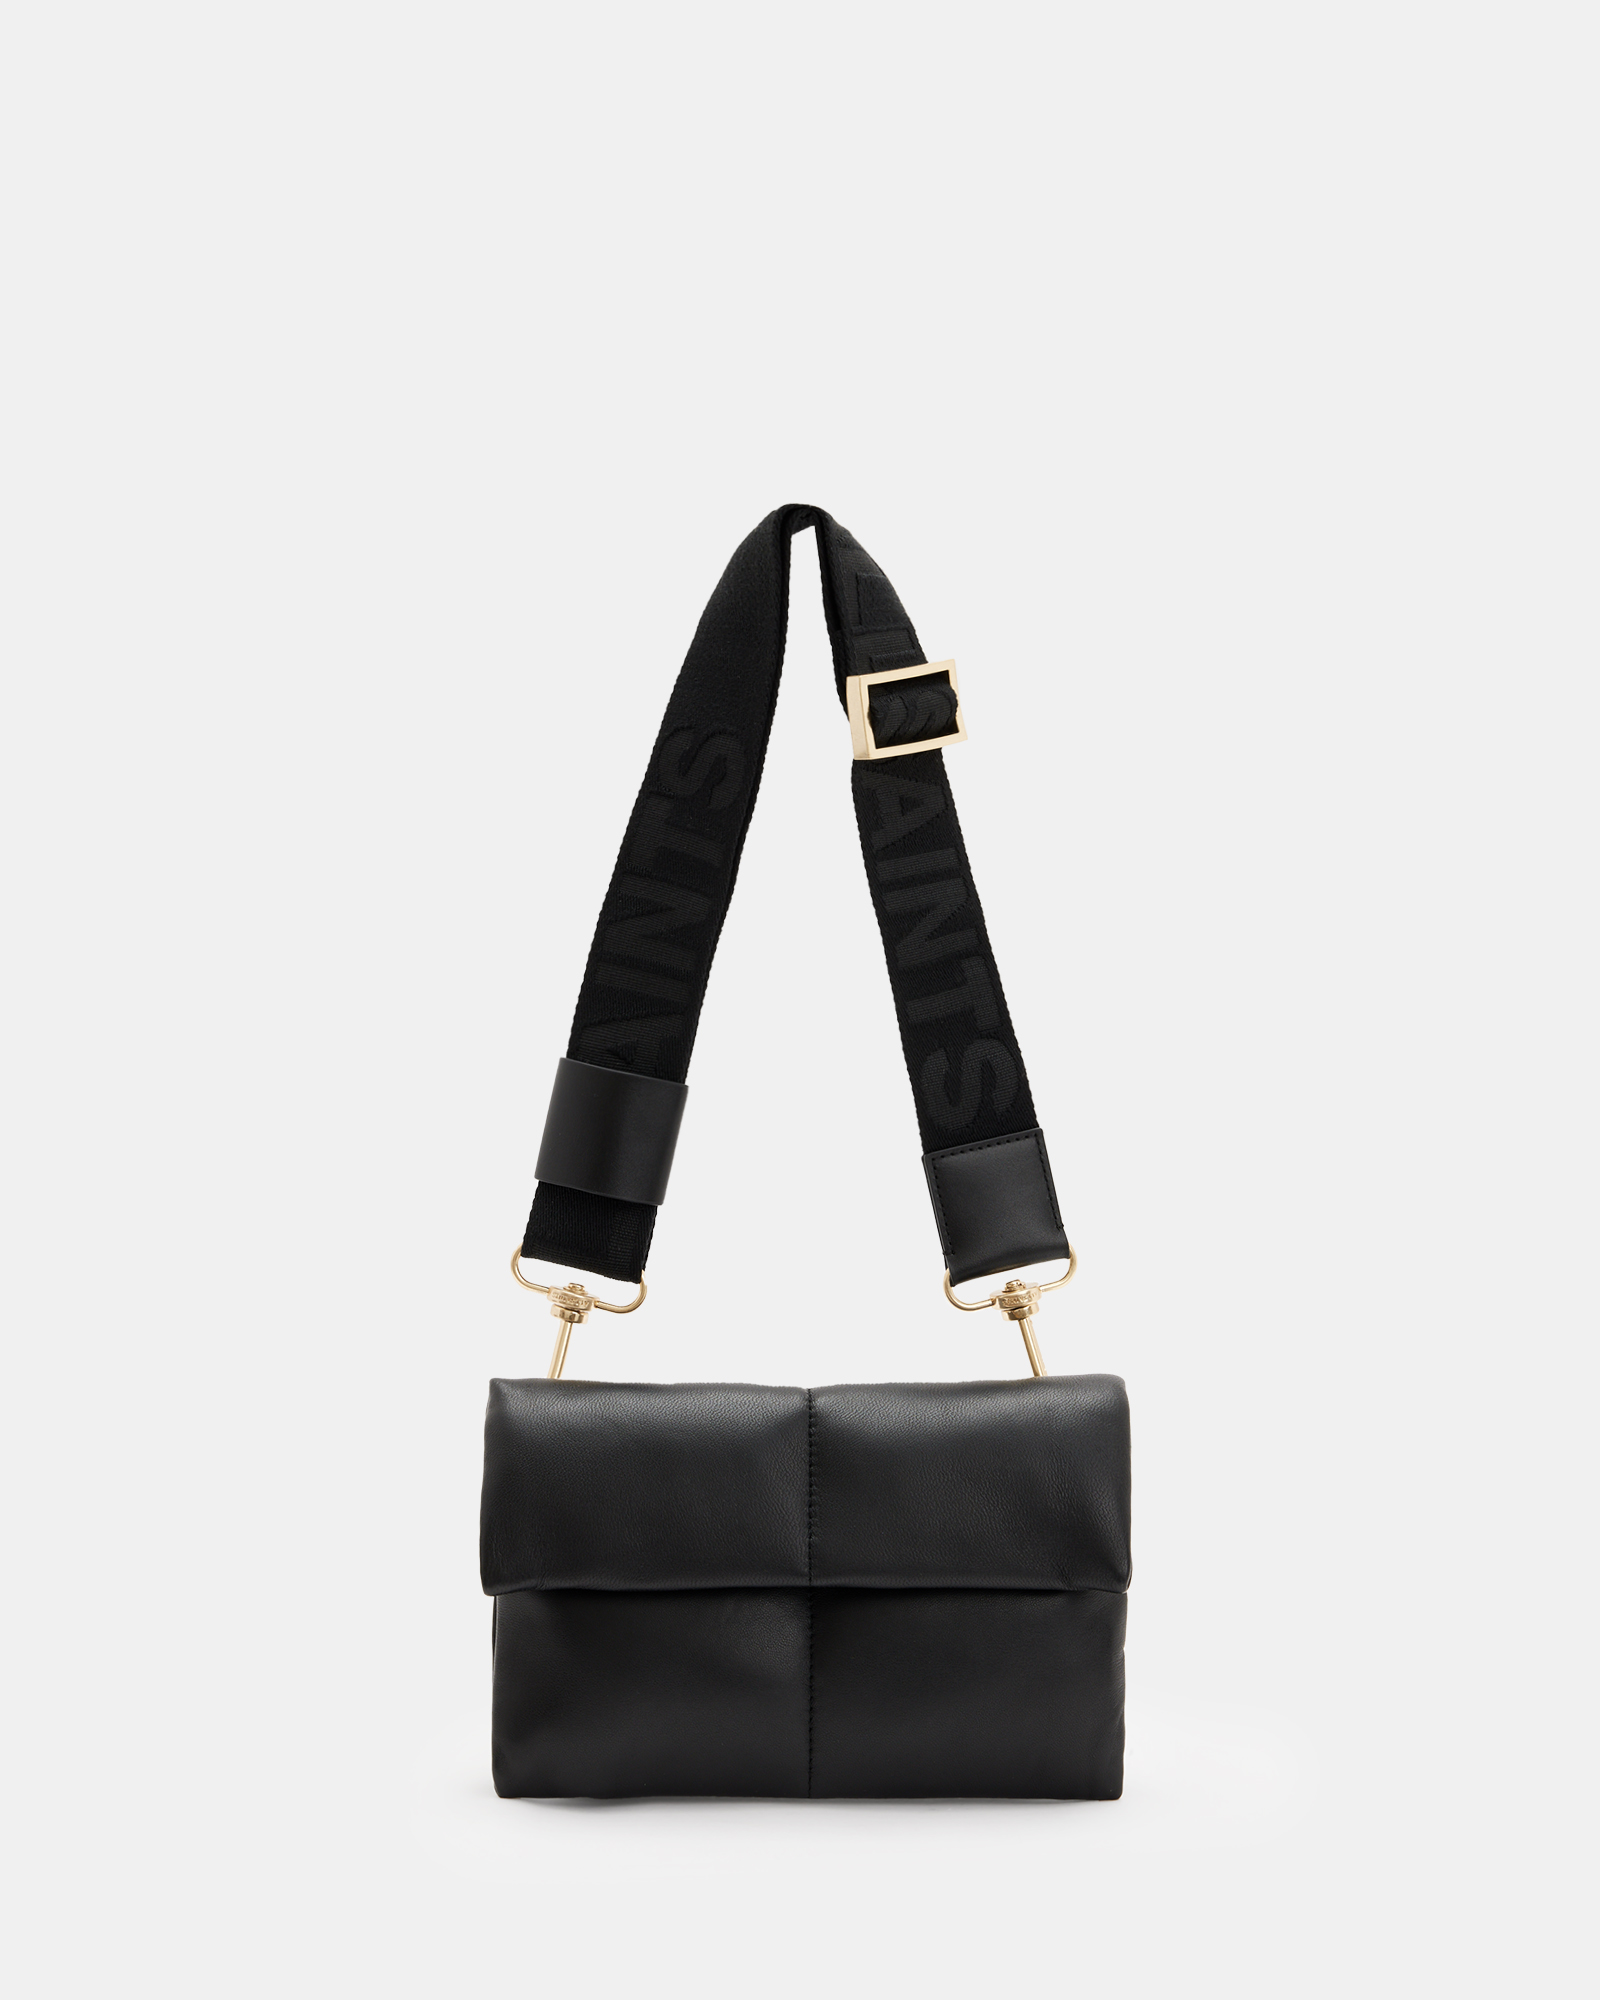 AllSaints Ezra Leather Quilted Crossbody Bag,, Black, Size: One Size